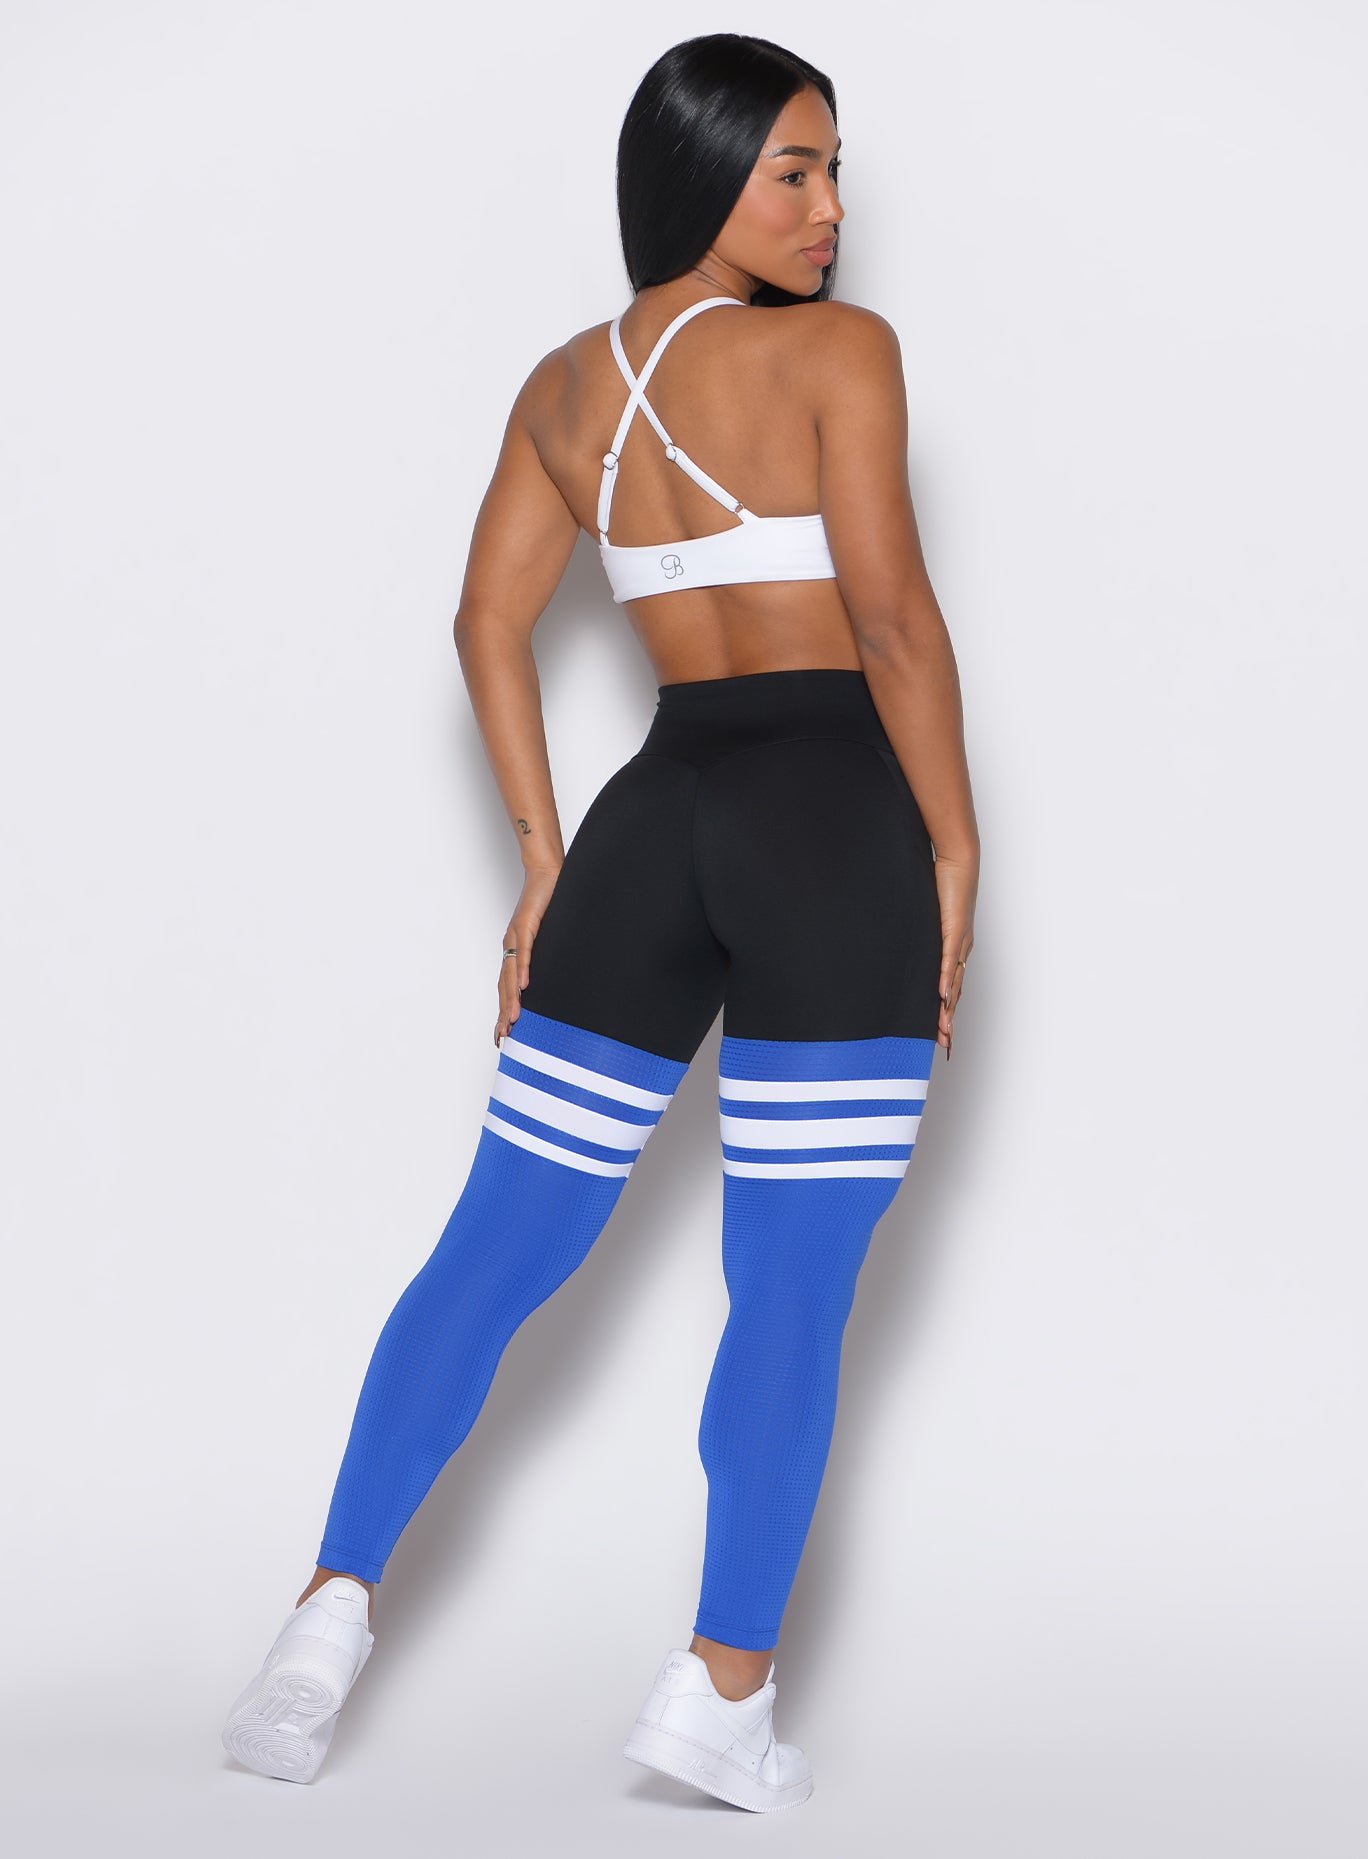 Back profile shot of a model  facing right wearing the Perform Thigh Highs in Black Sky color along with a white sports bra